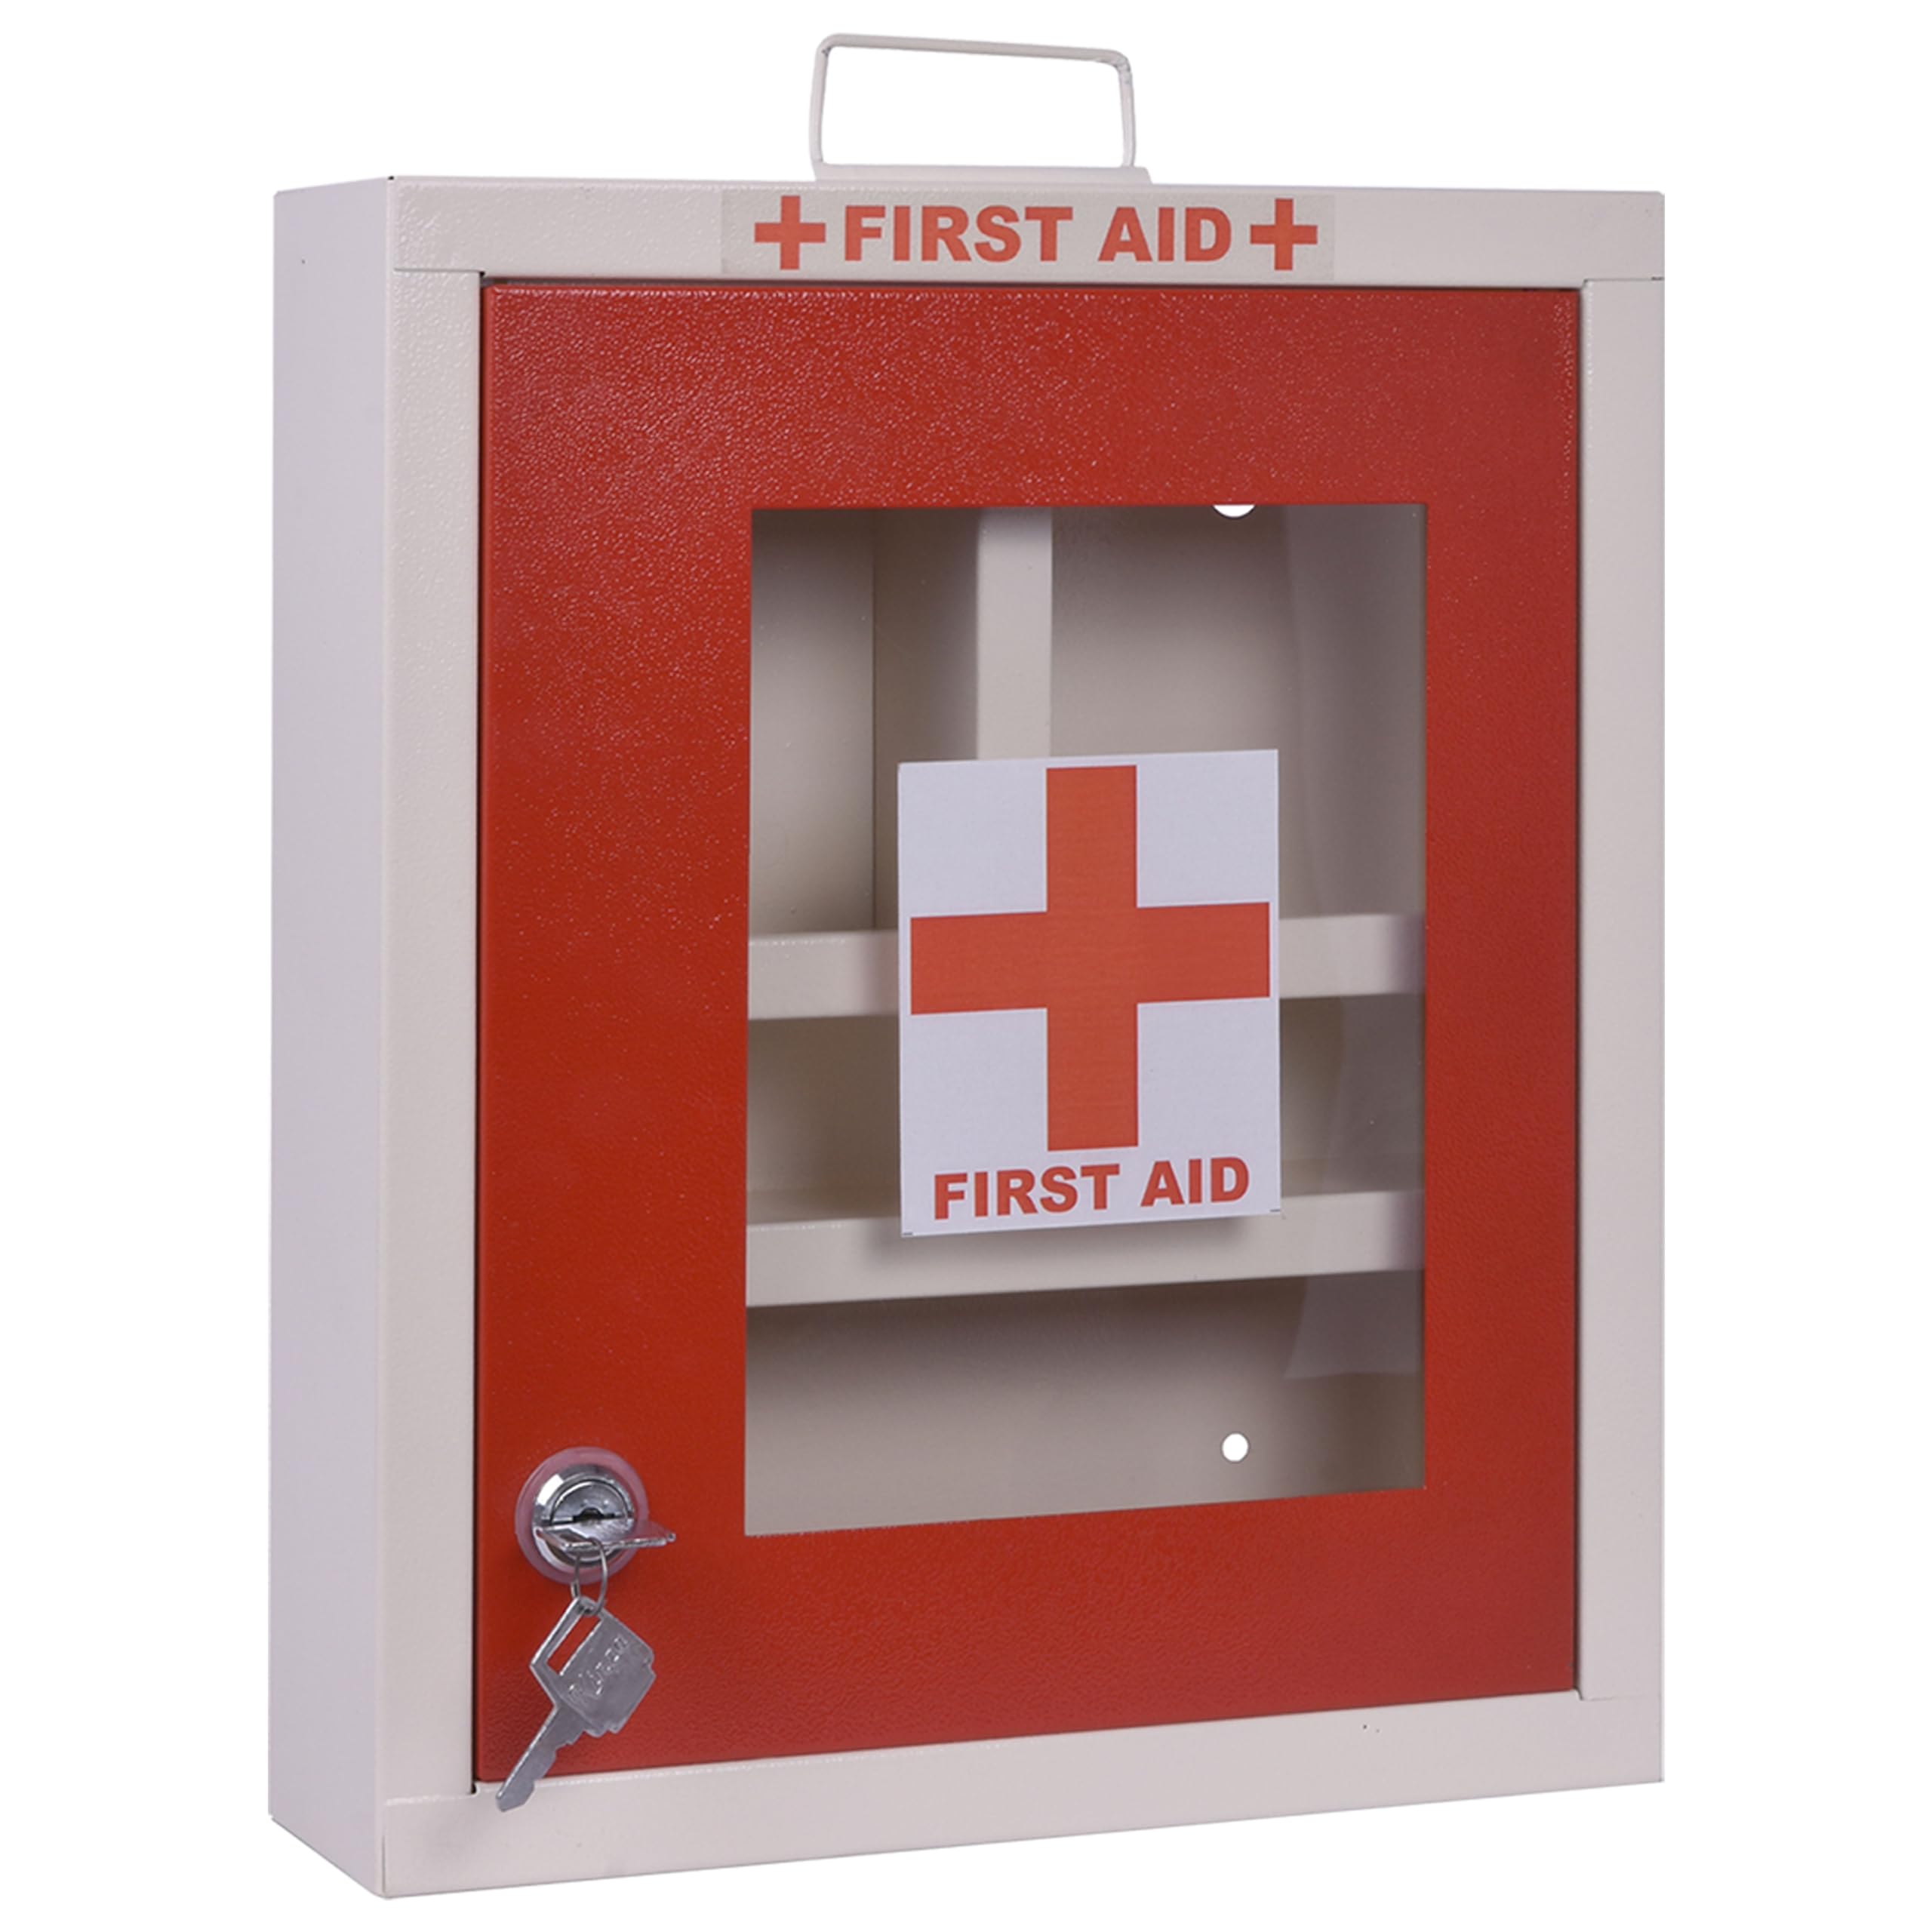 Plantex Emergency First Aid Kit Box/Emergency Medical Box/First Aid Box For Home - School - office/Wall Mountable, Multi Compartment (Metal) Rectangular